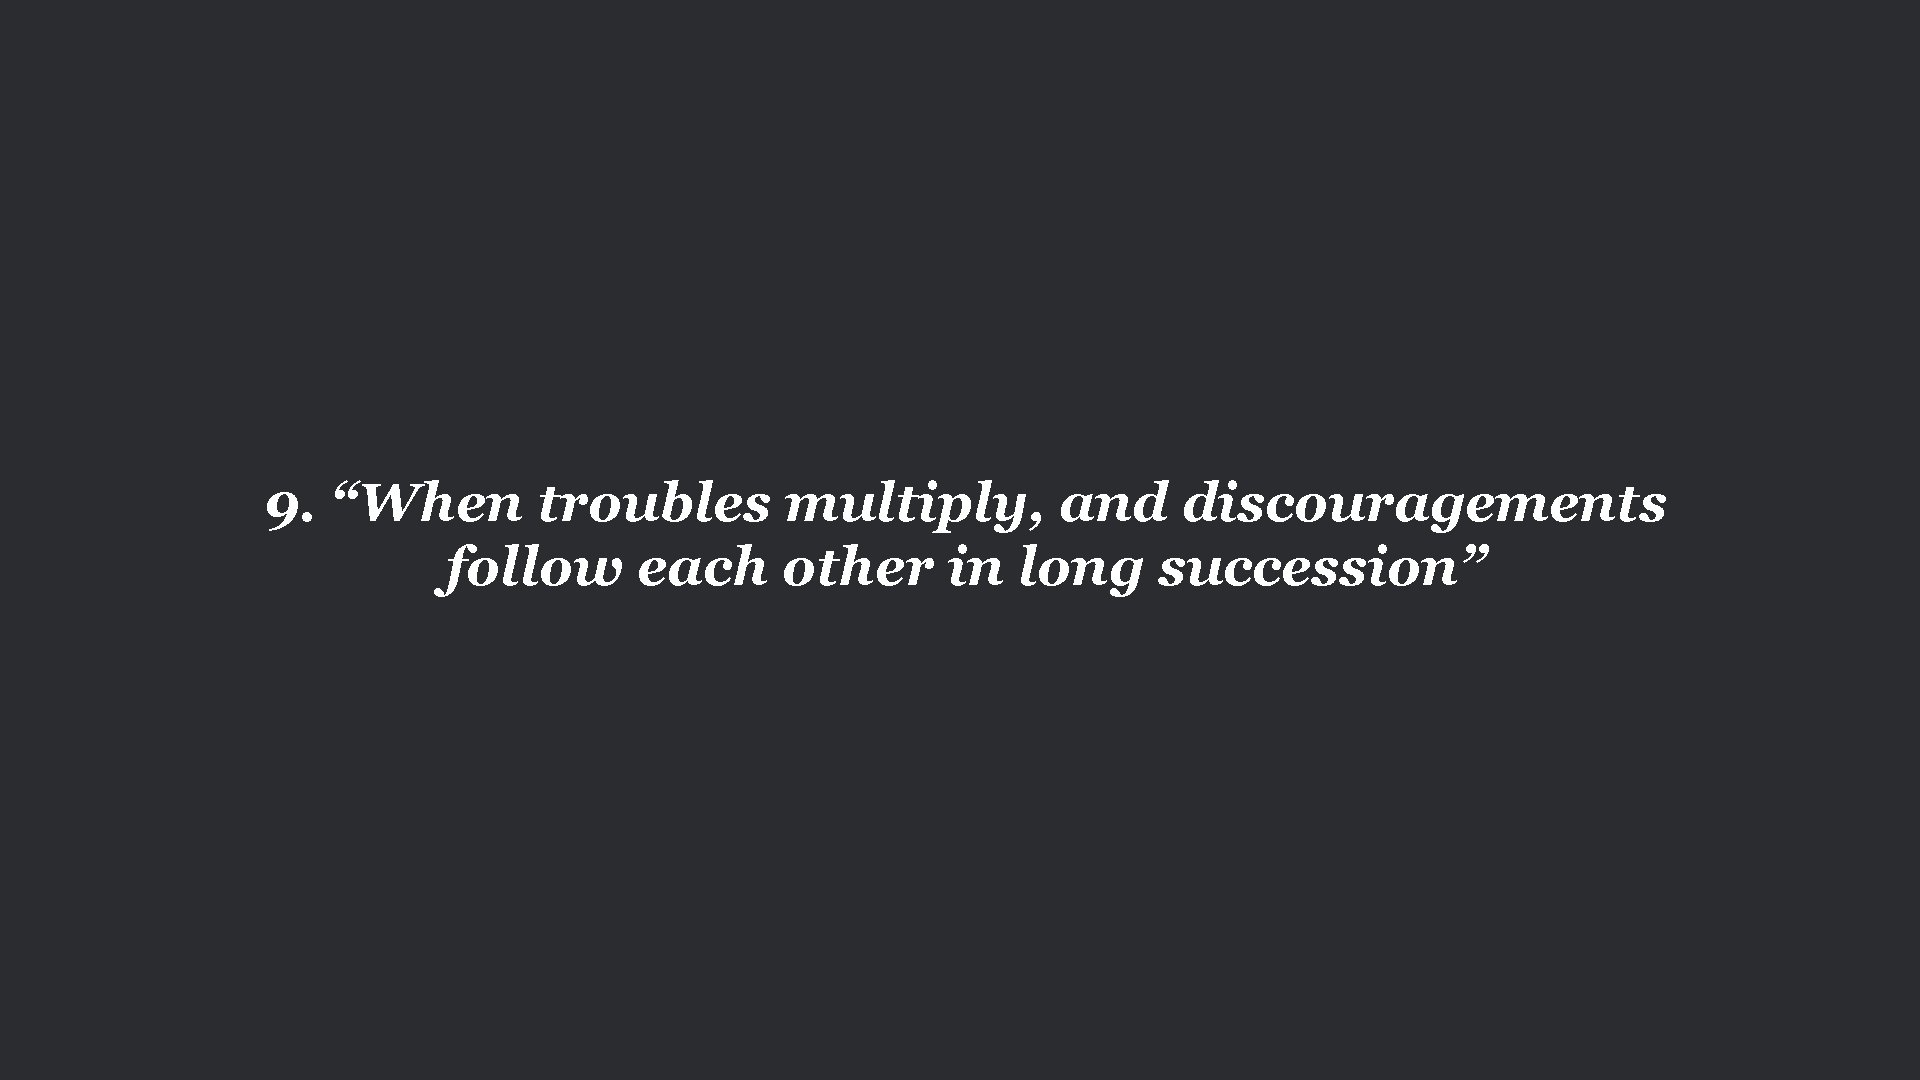 9. “When troubles multiply, and discouragements follow each other in long succession” 